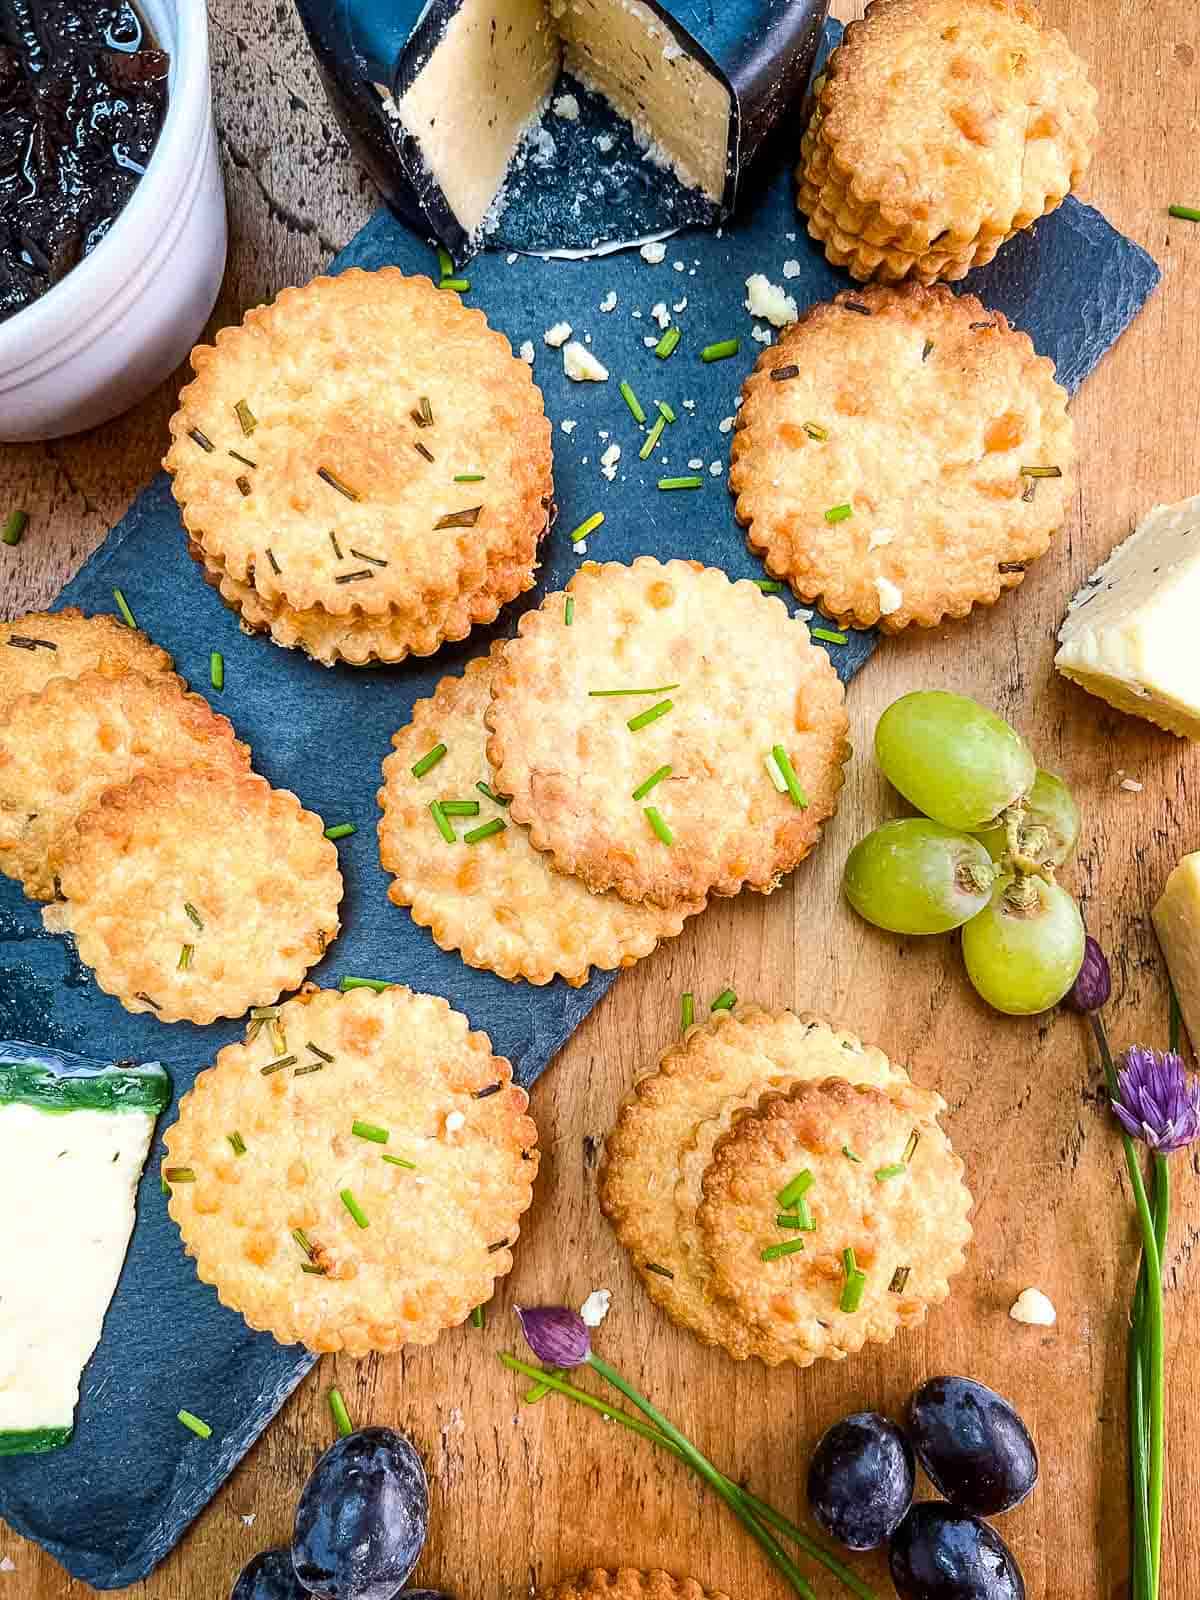 cheese biscuits with chives served with chutney, grapes and cheese.